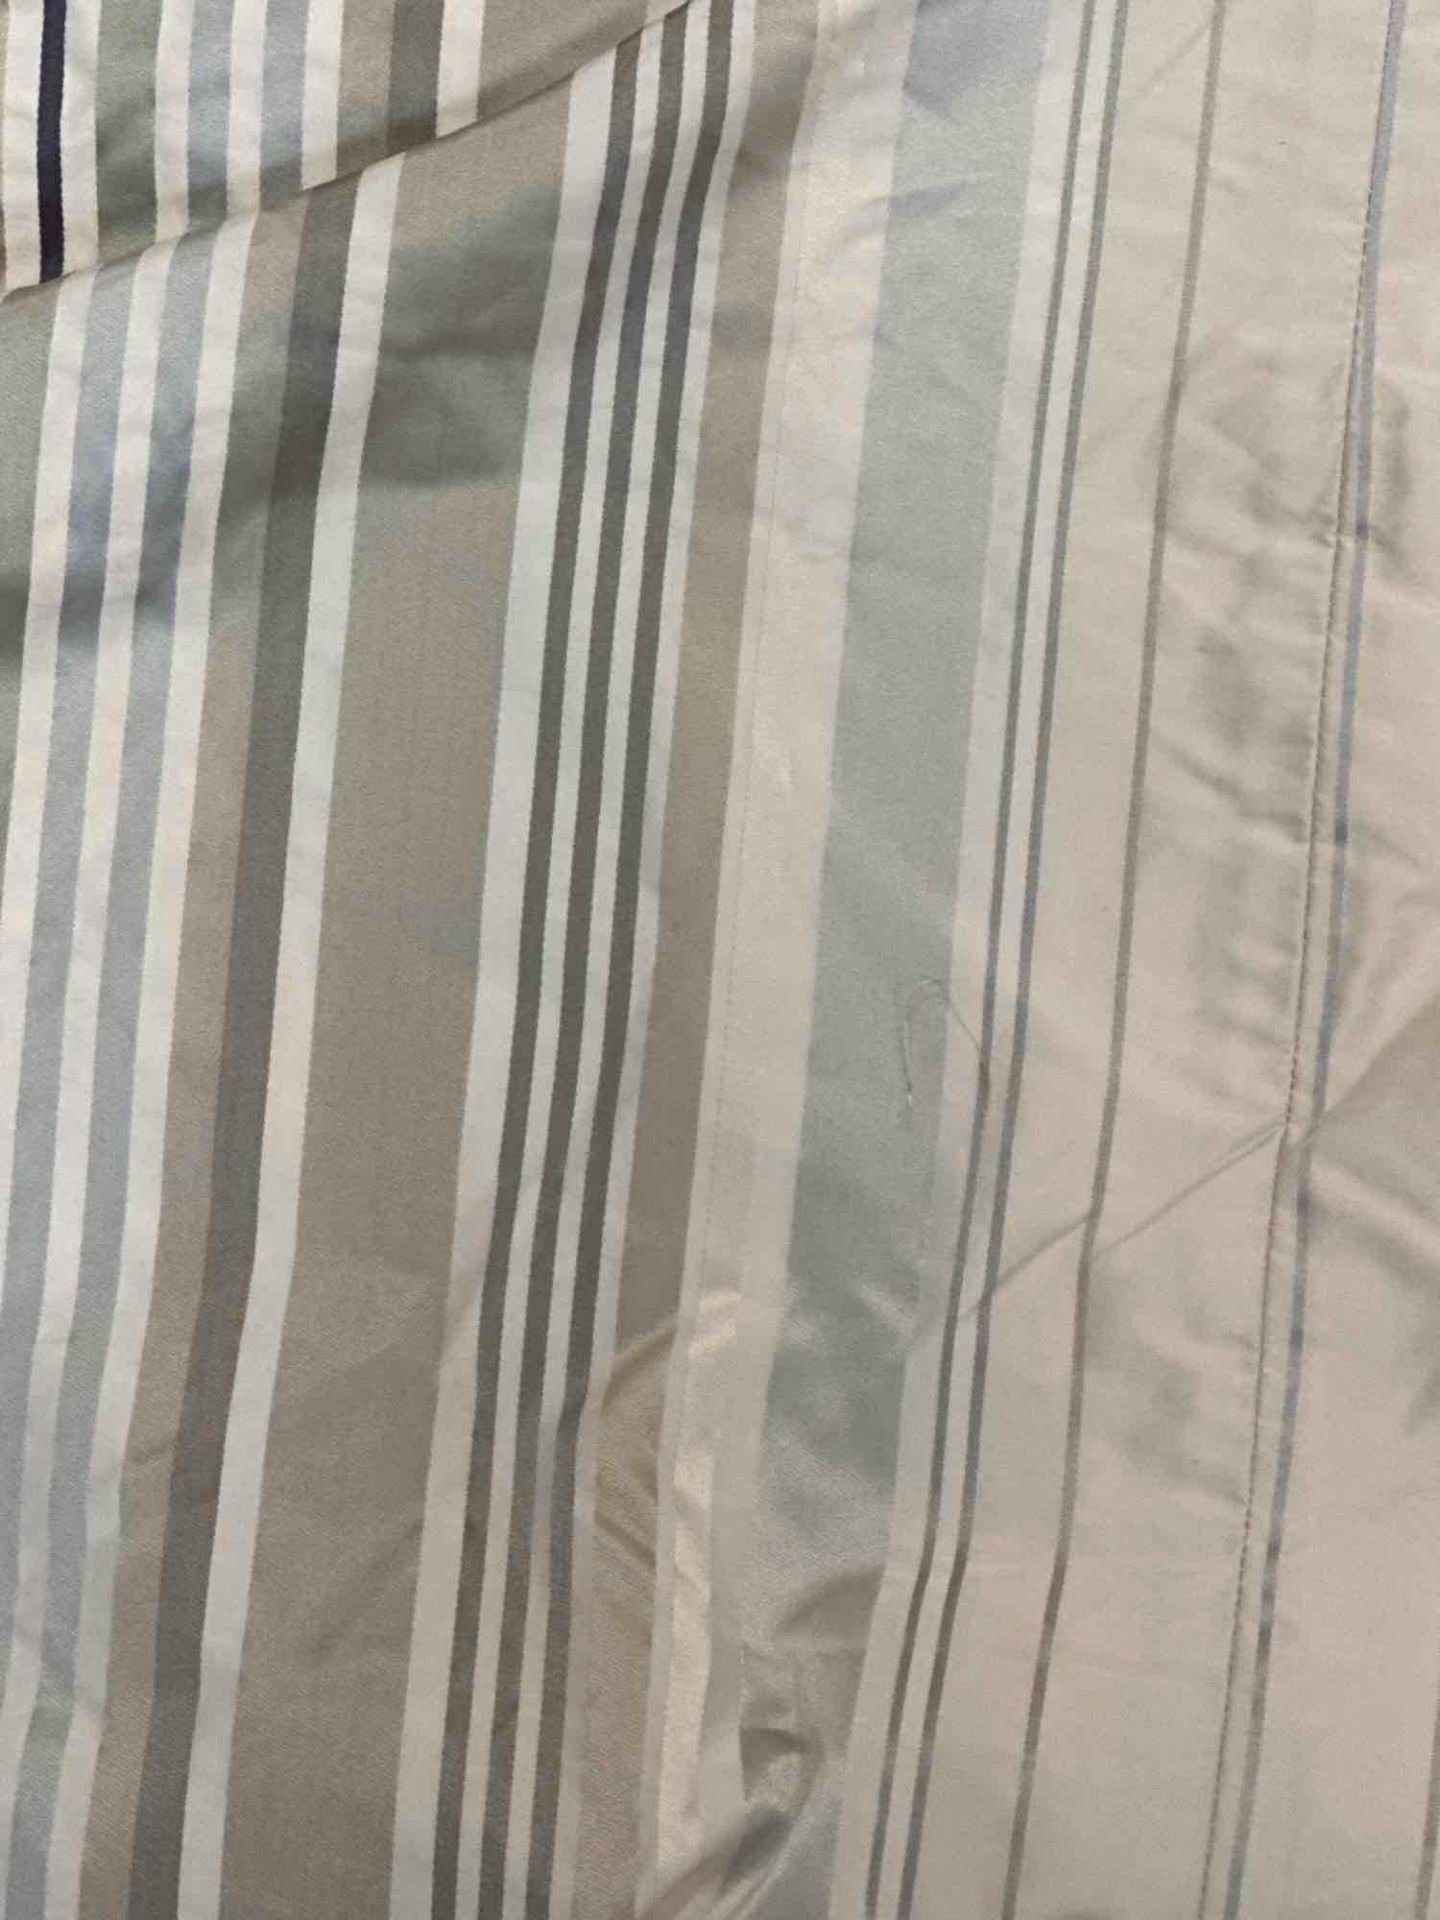 One Panel Of Striped Silk Lined Curtains 103 x 257cm - Image 4 of 4